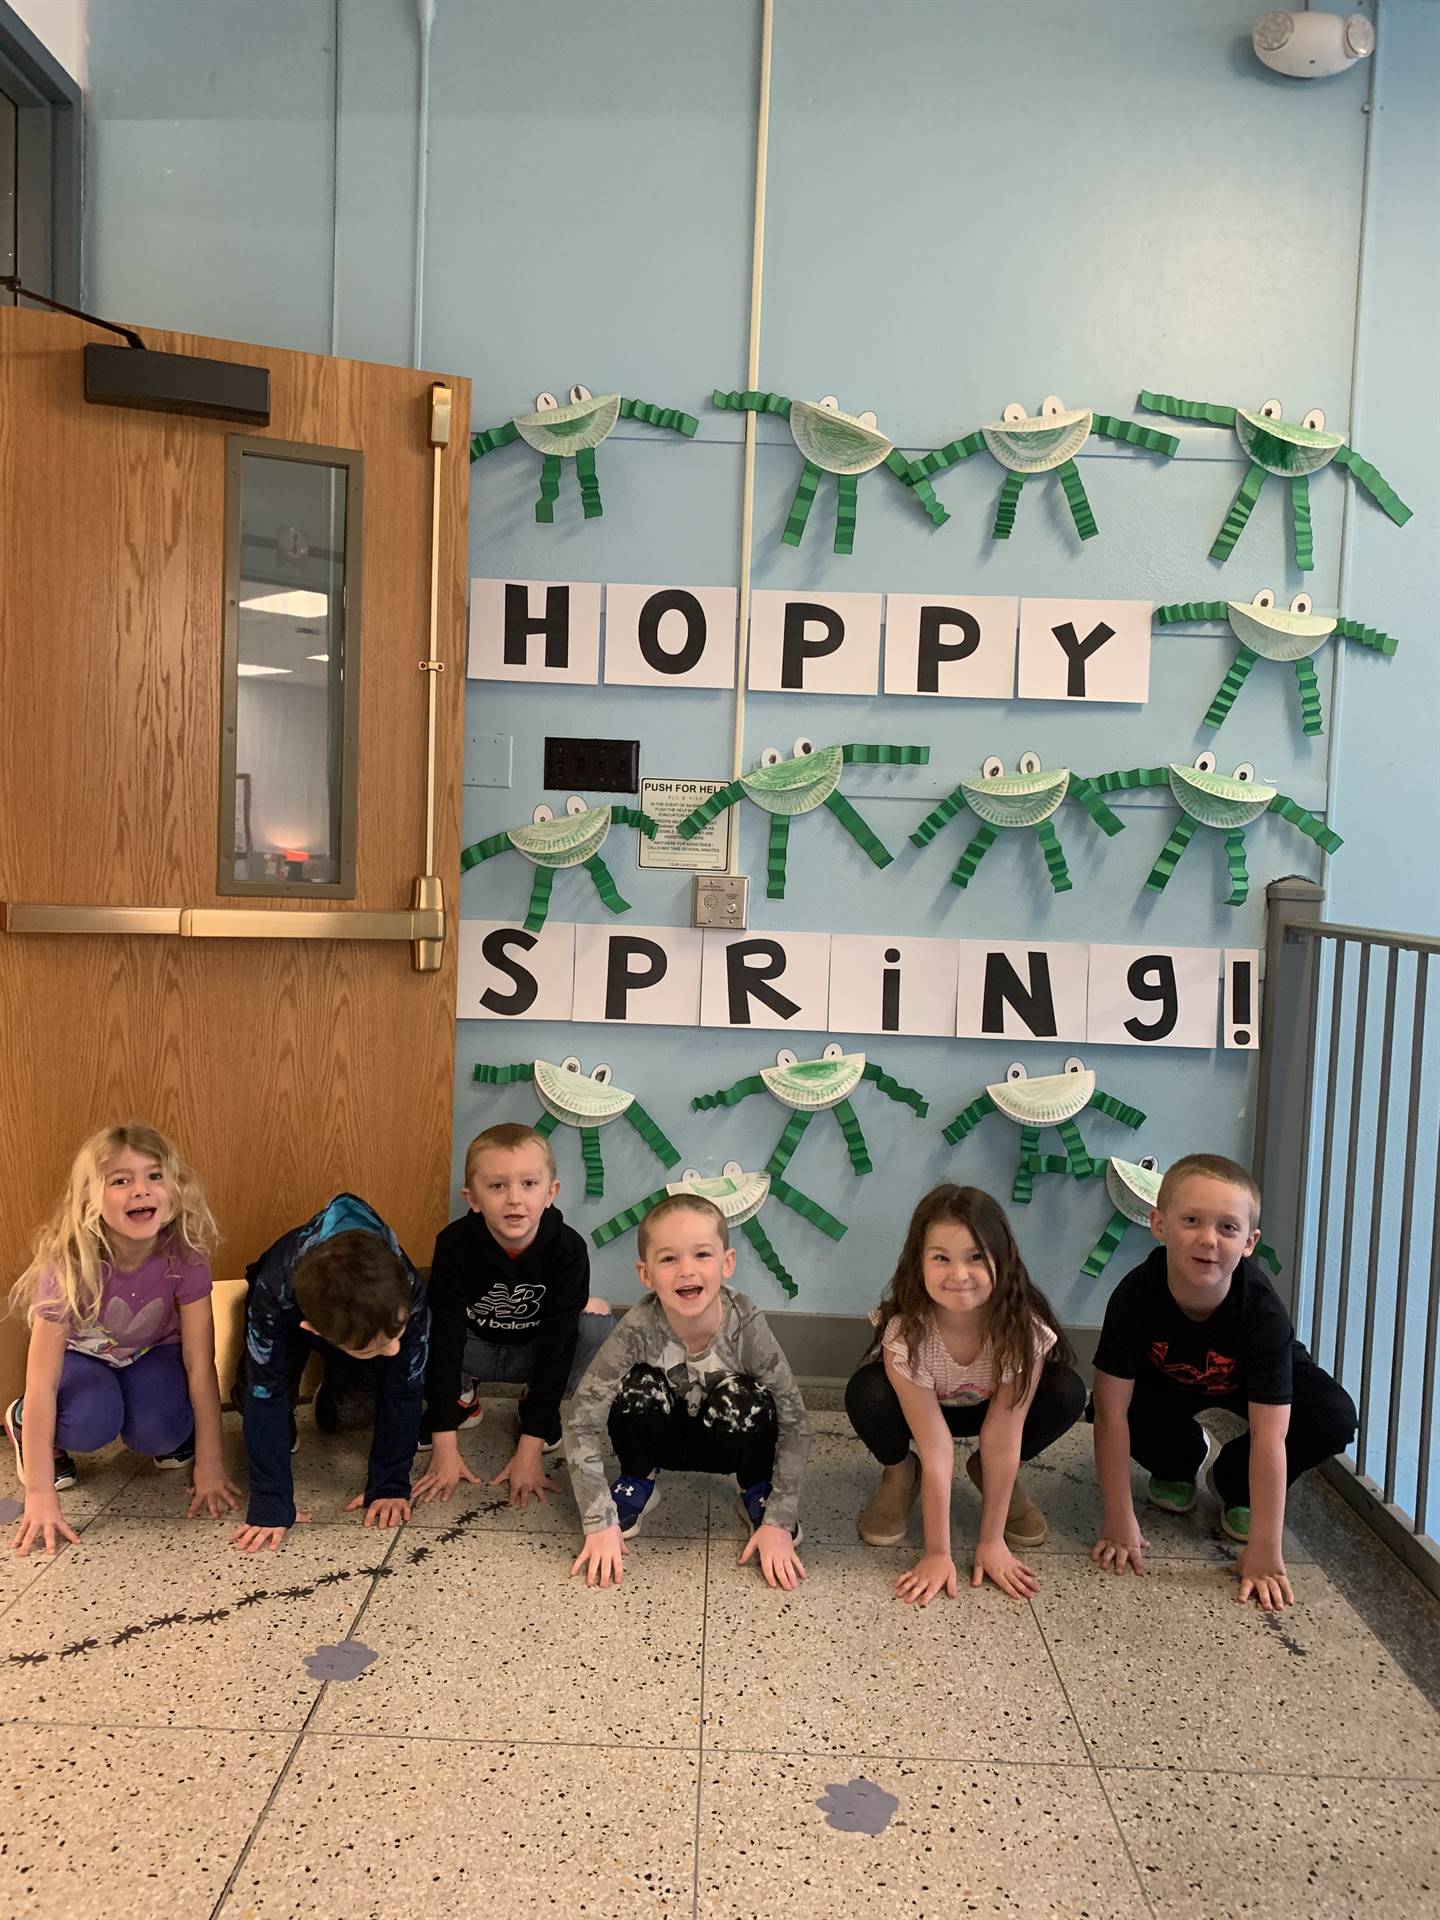 6 students hopping like frogs. background is sign "hoppy spring" with paper craft frogs.